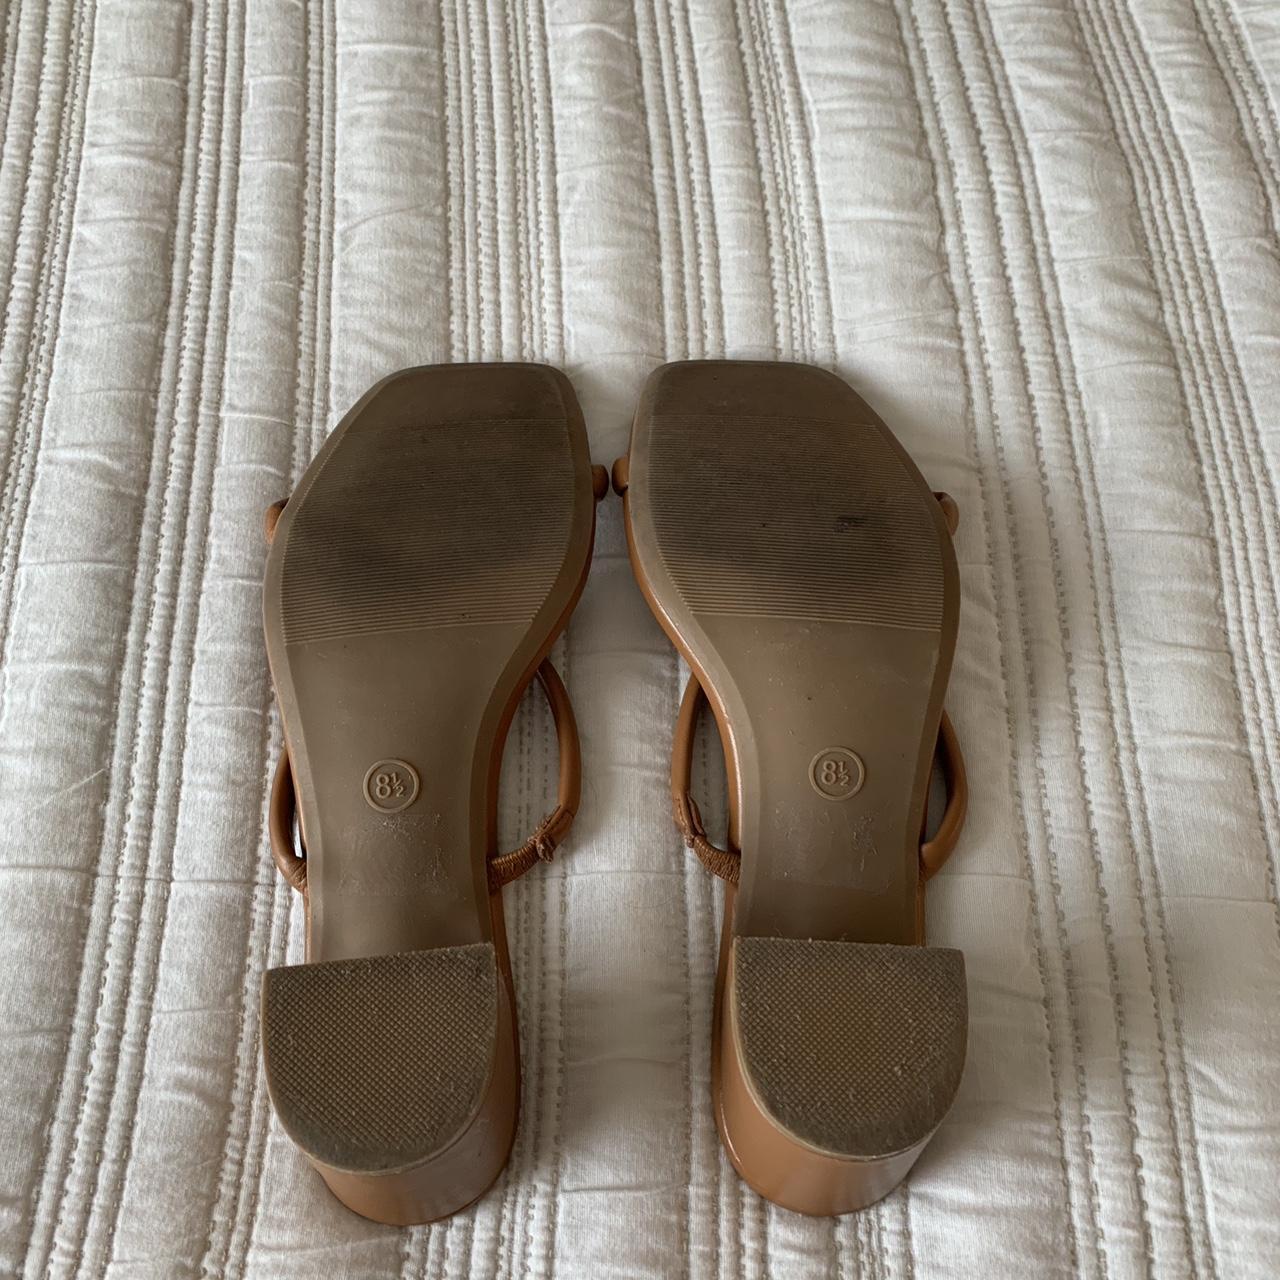 A New Day Women's Tan and Brown Sandals (2)